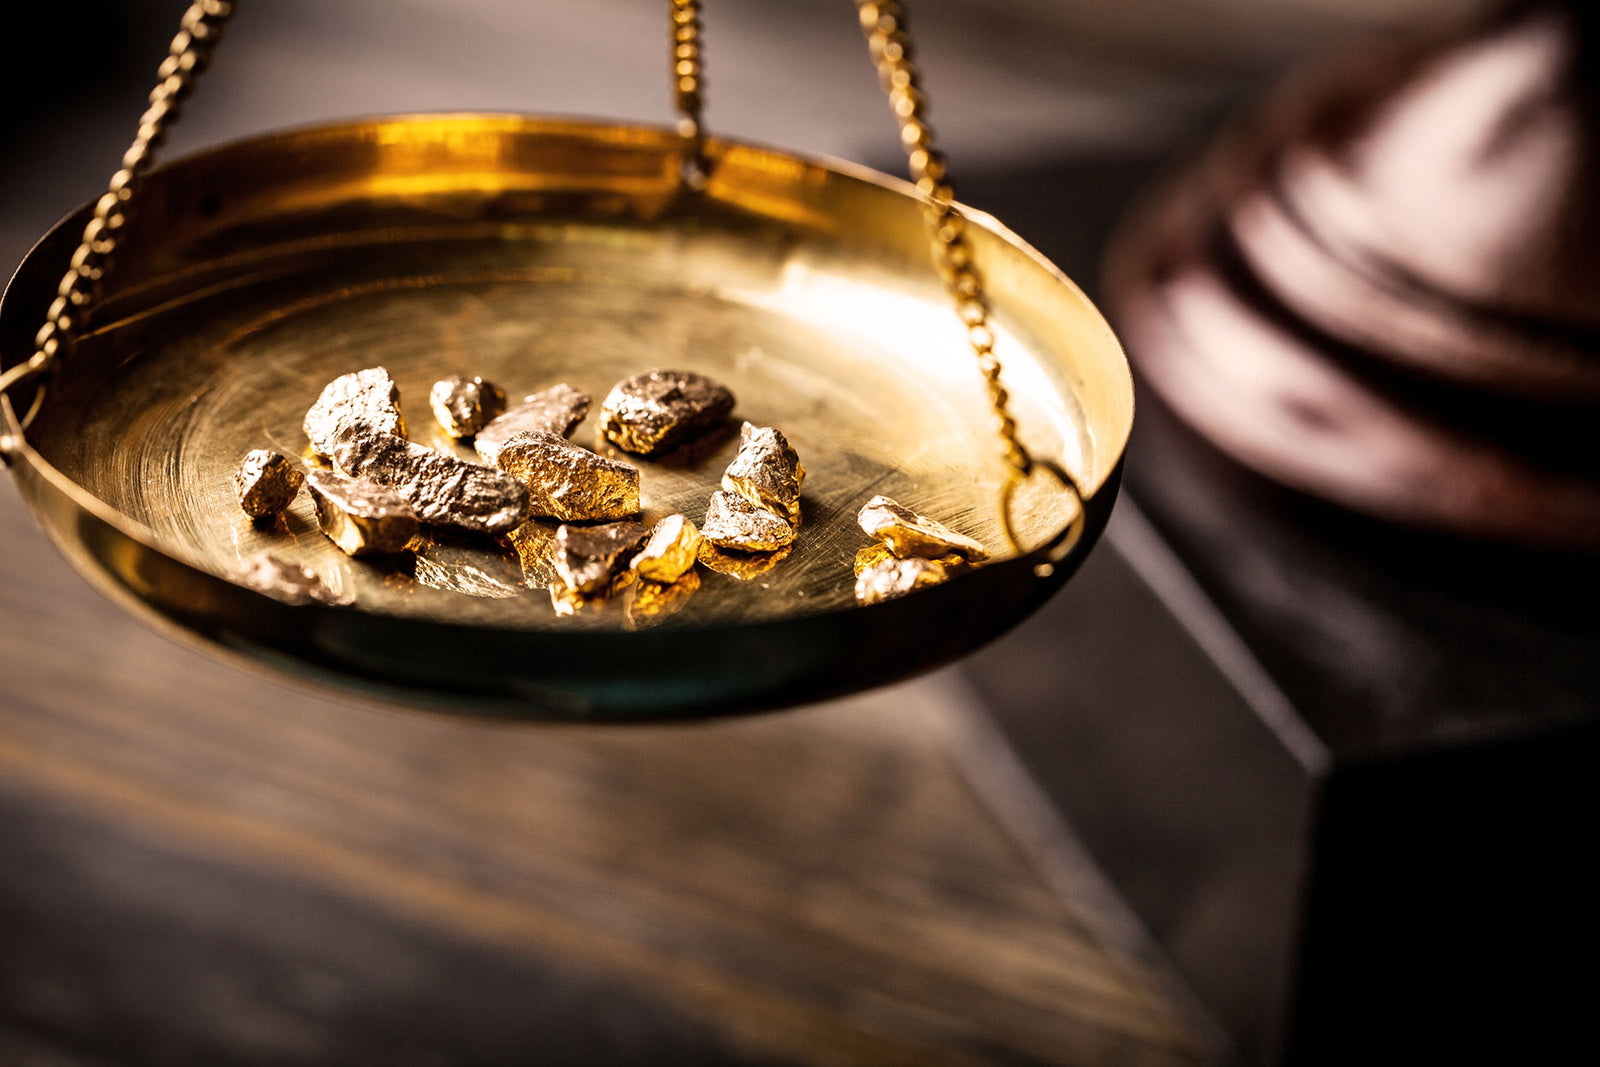 Weighing precious metals to communicate sense of intrinsic value